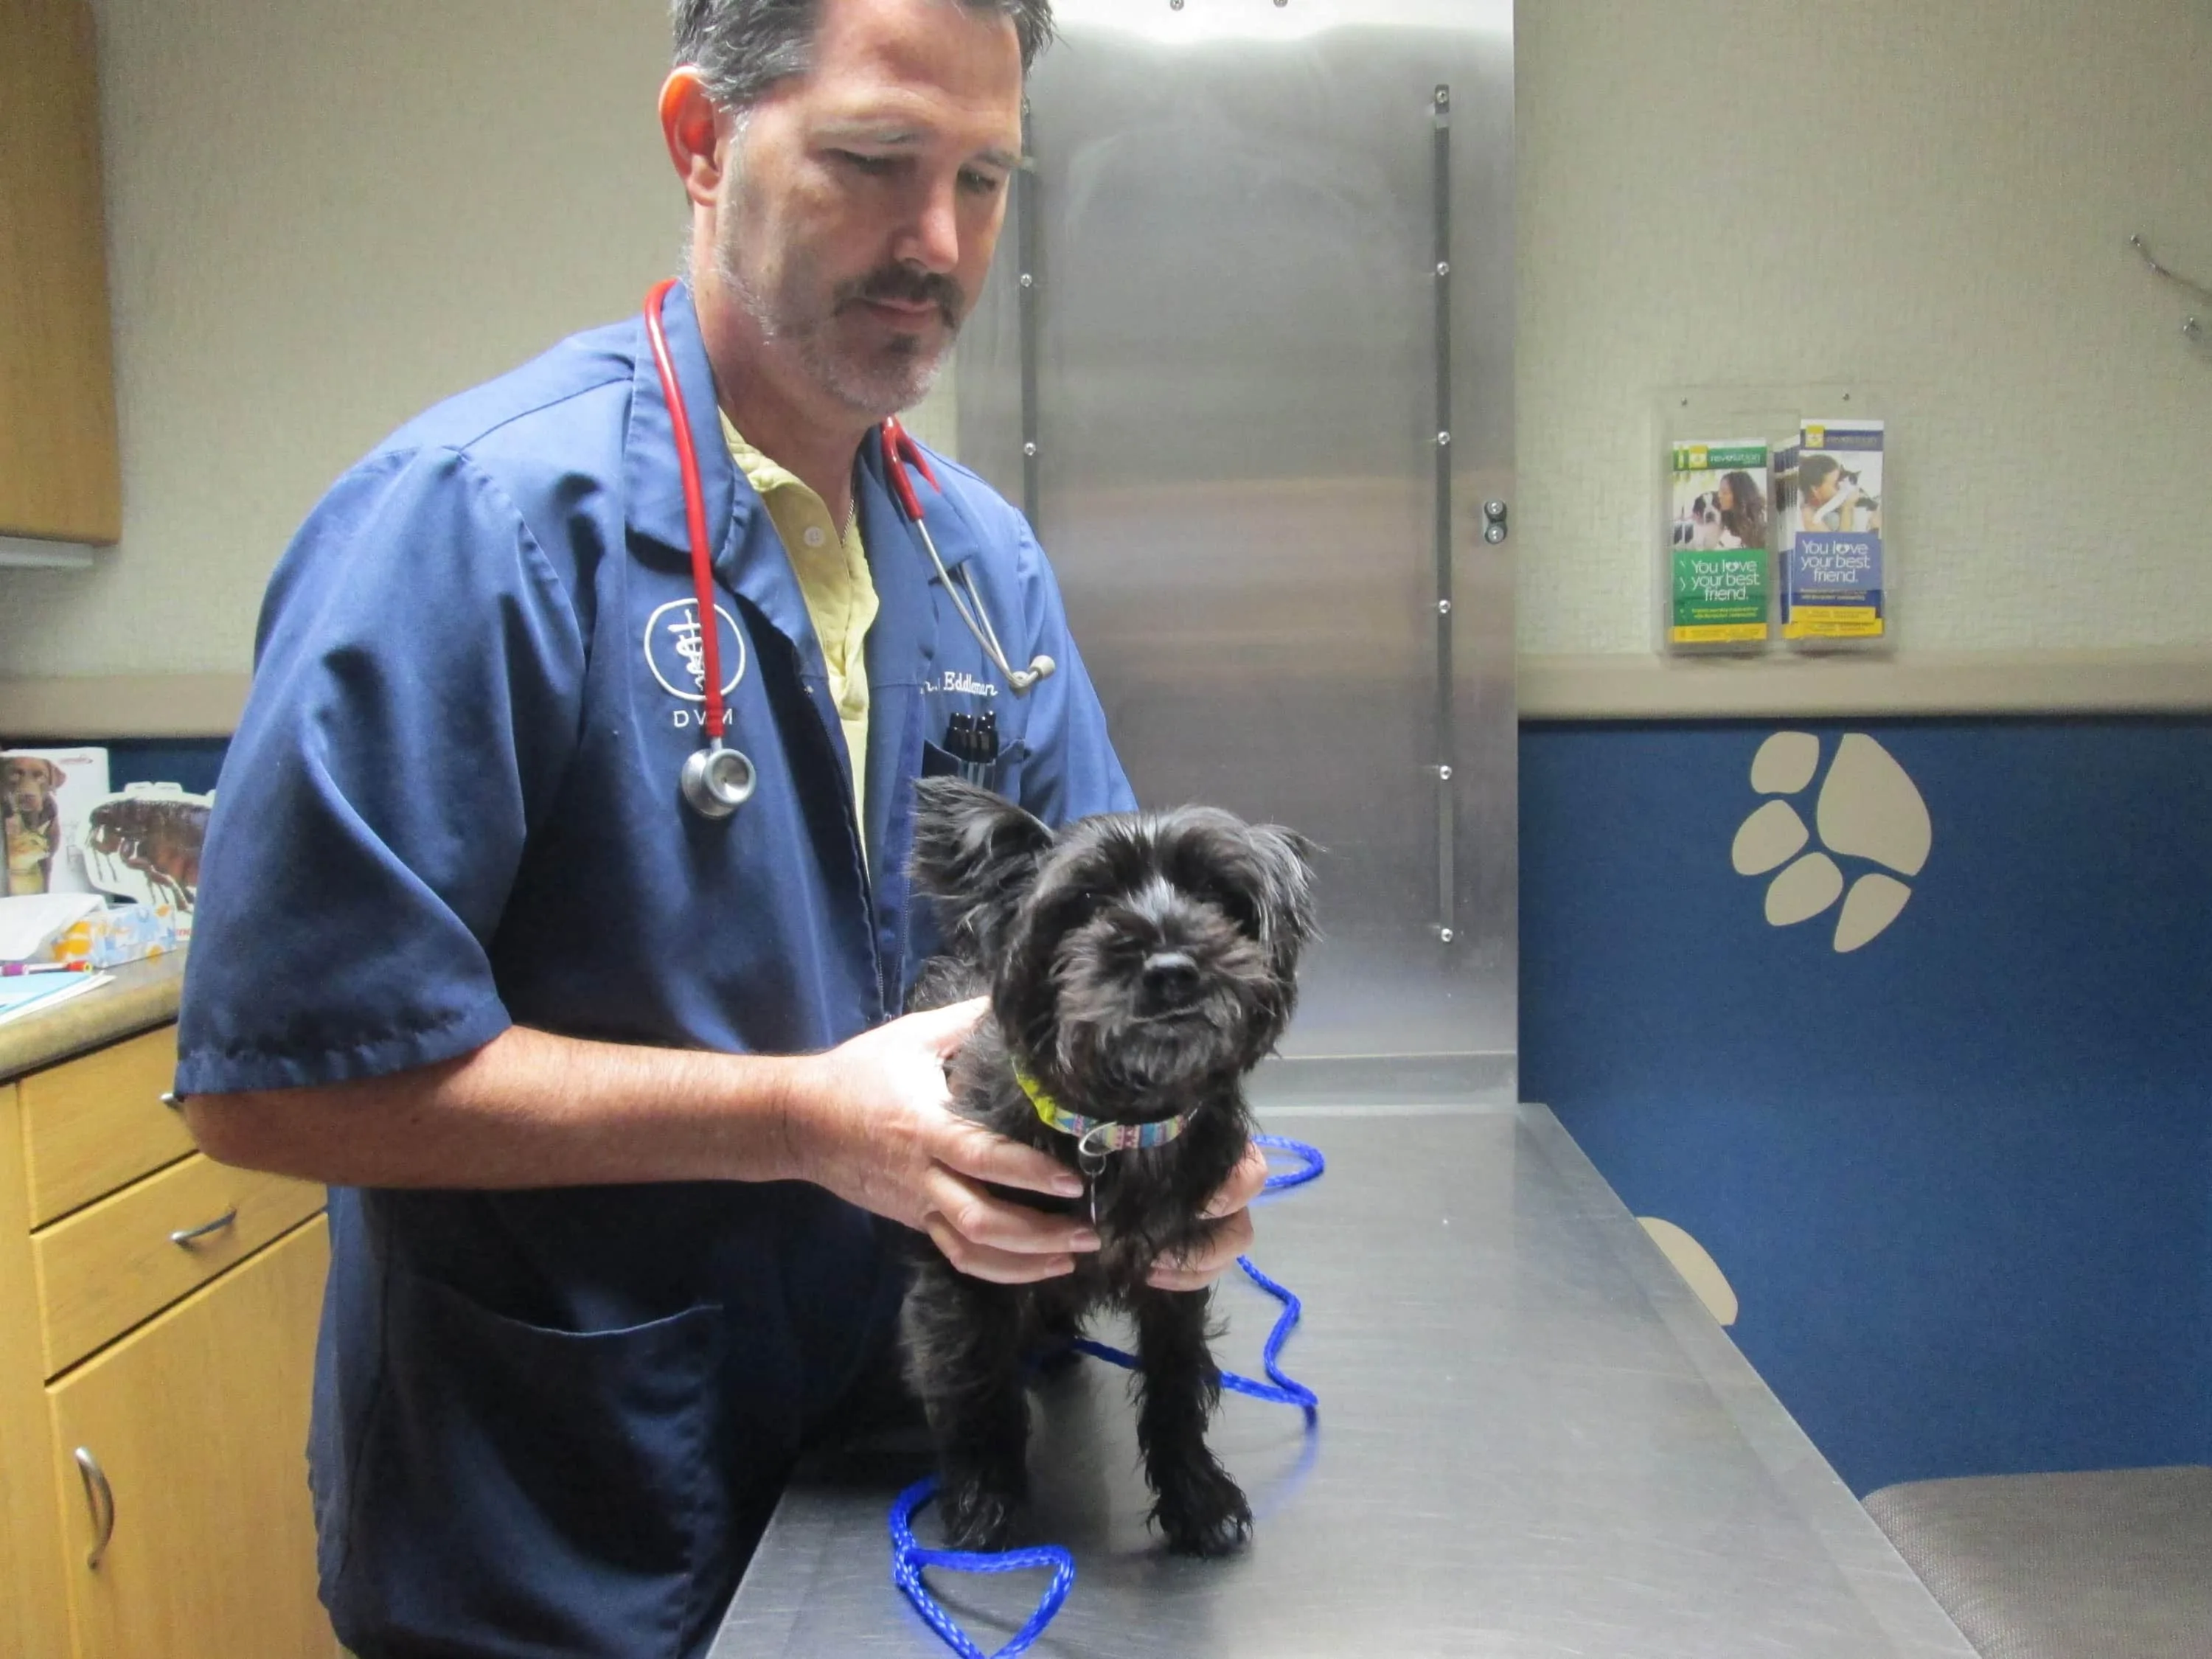 Doctor with dog